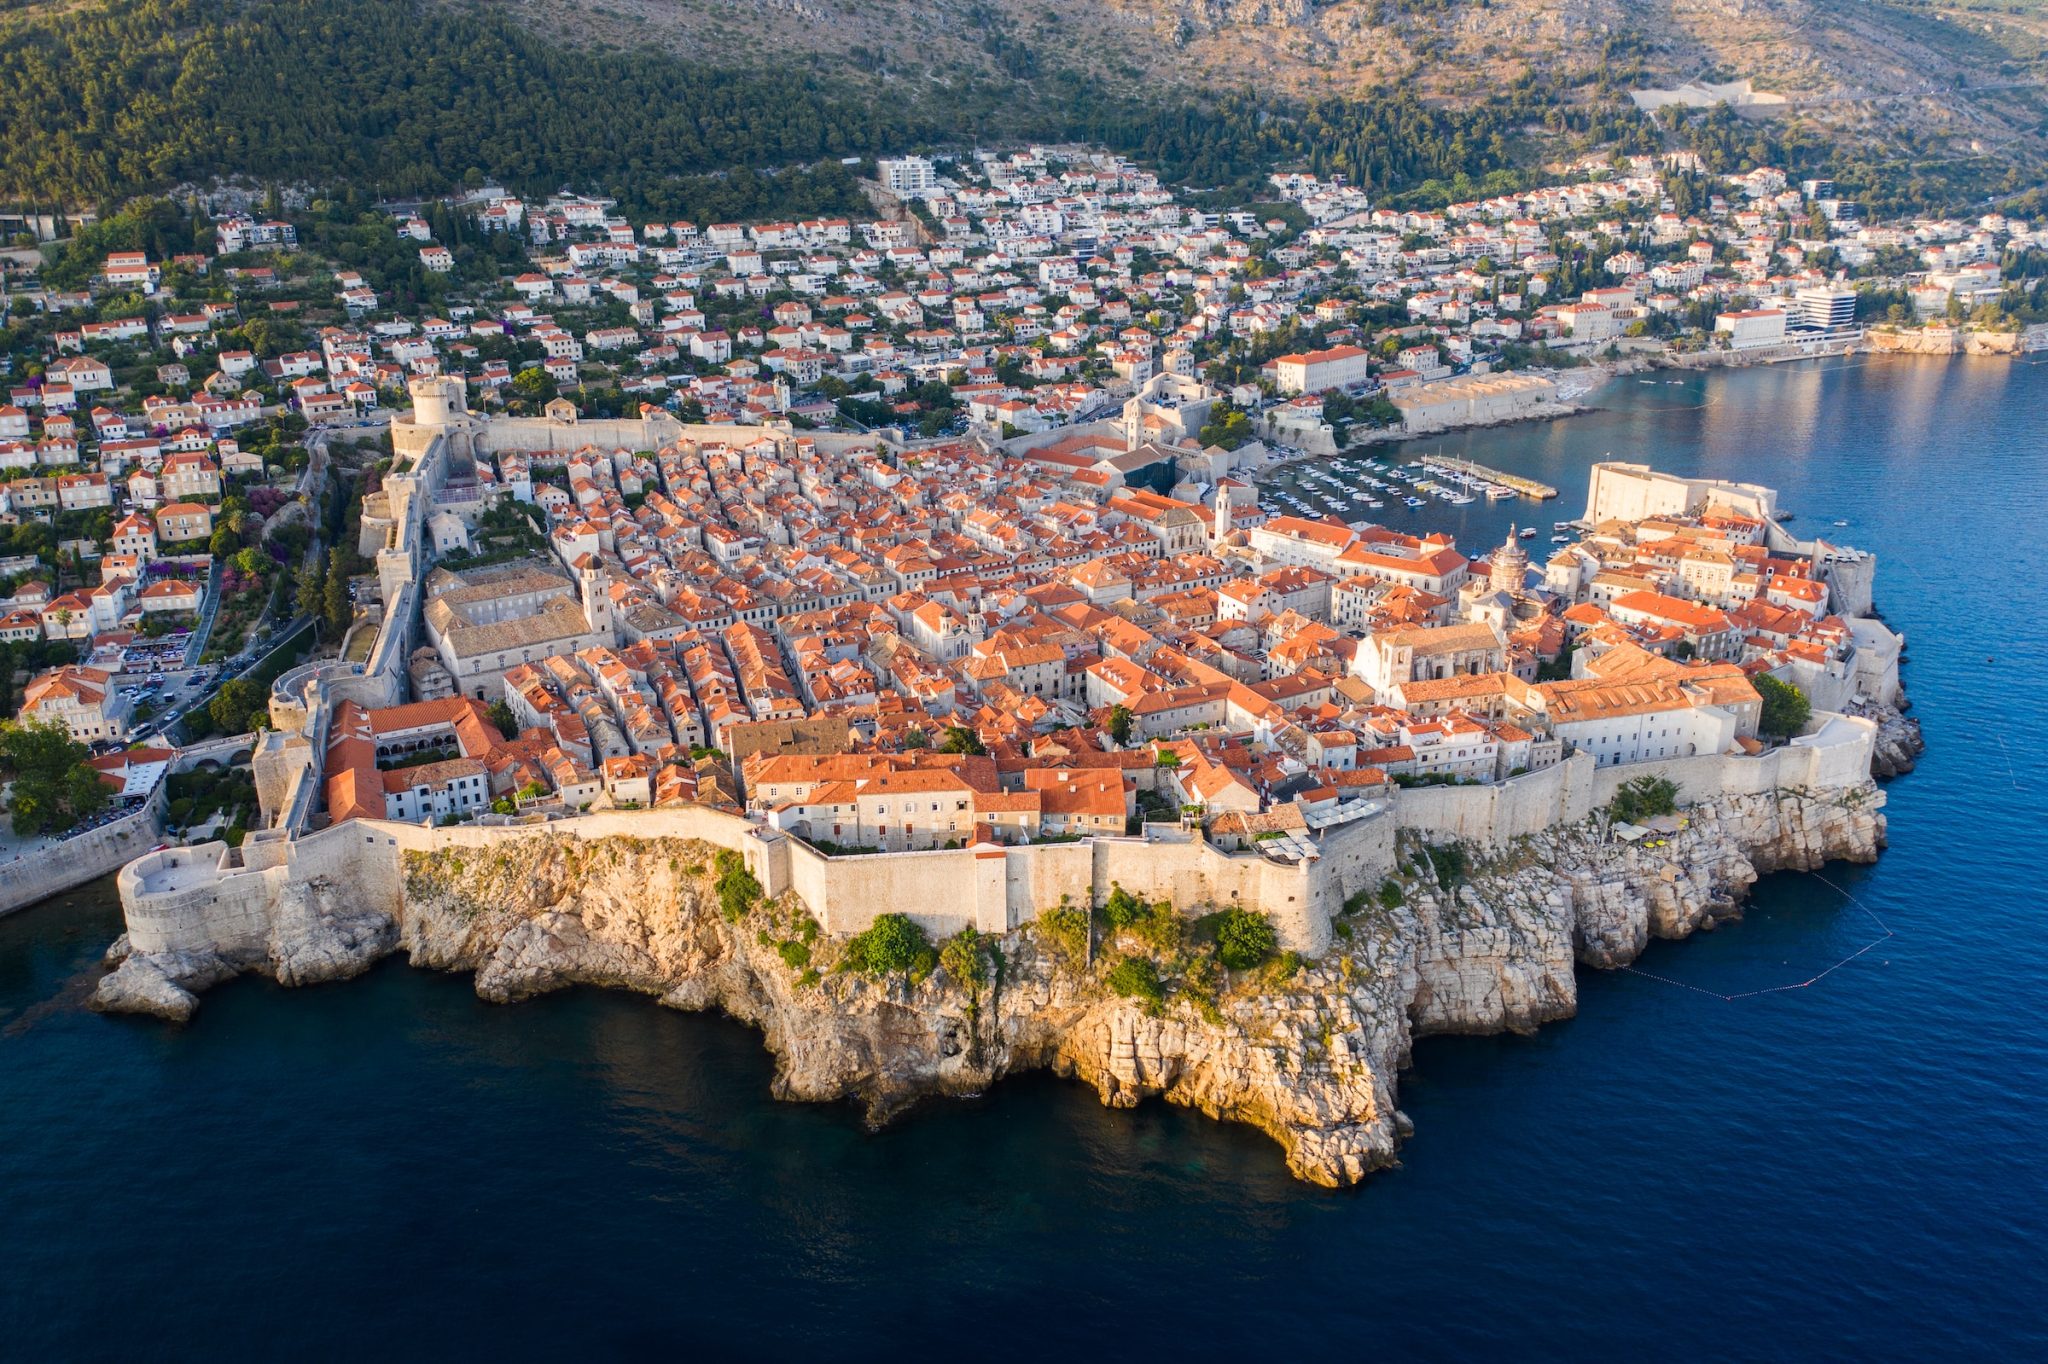 Live out your "game of thrones" fantasies with these travel destinations